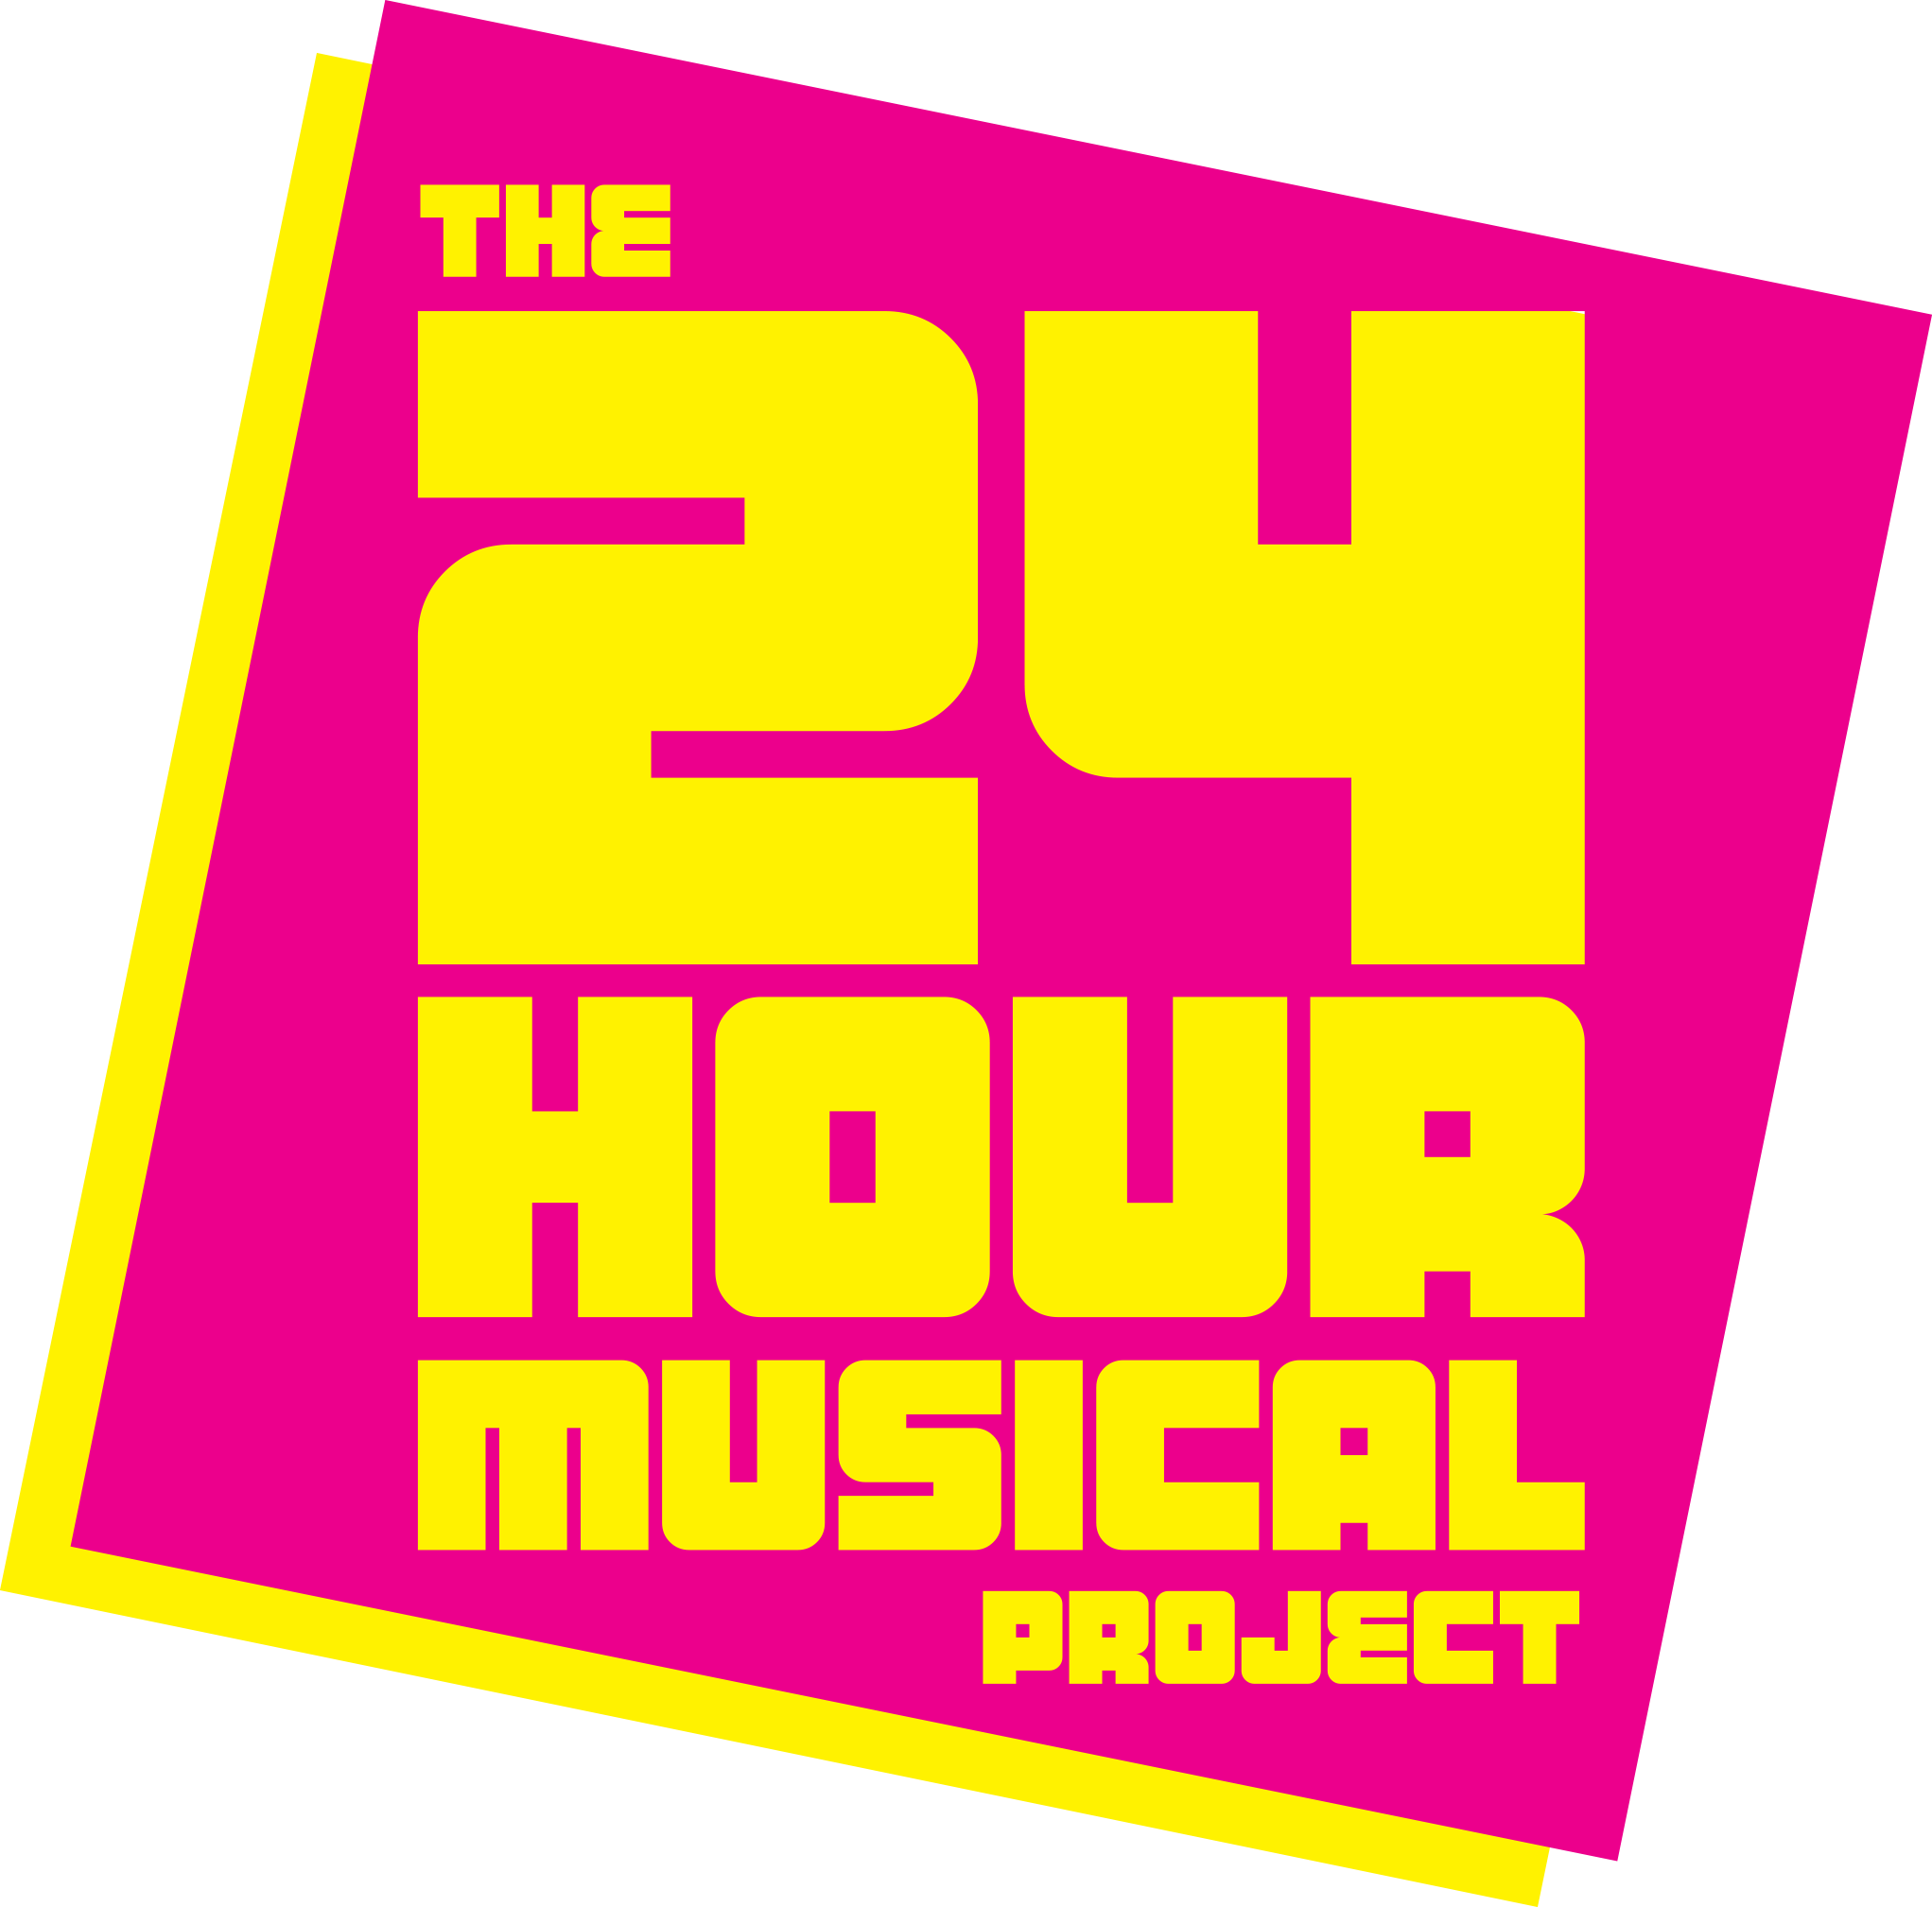 The 24 Hour Musical Project